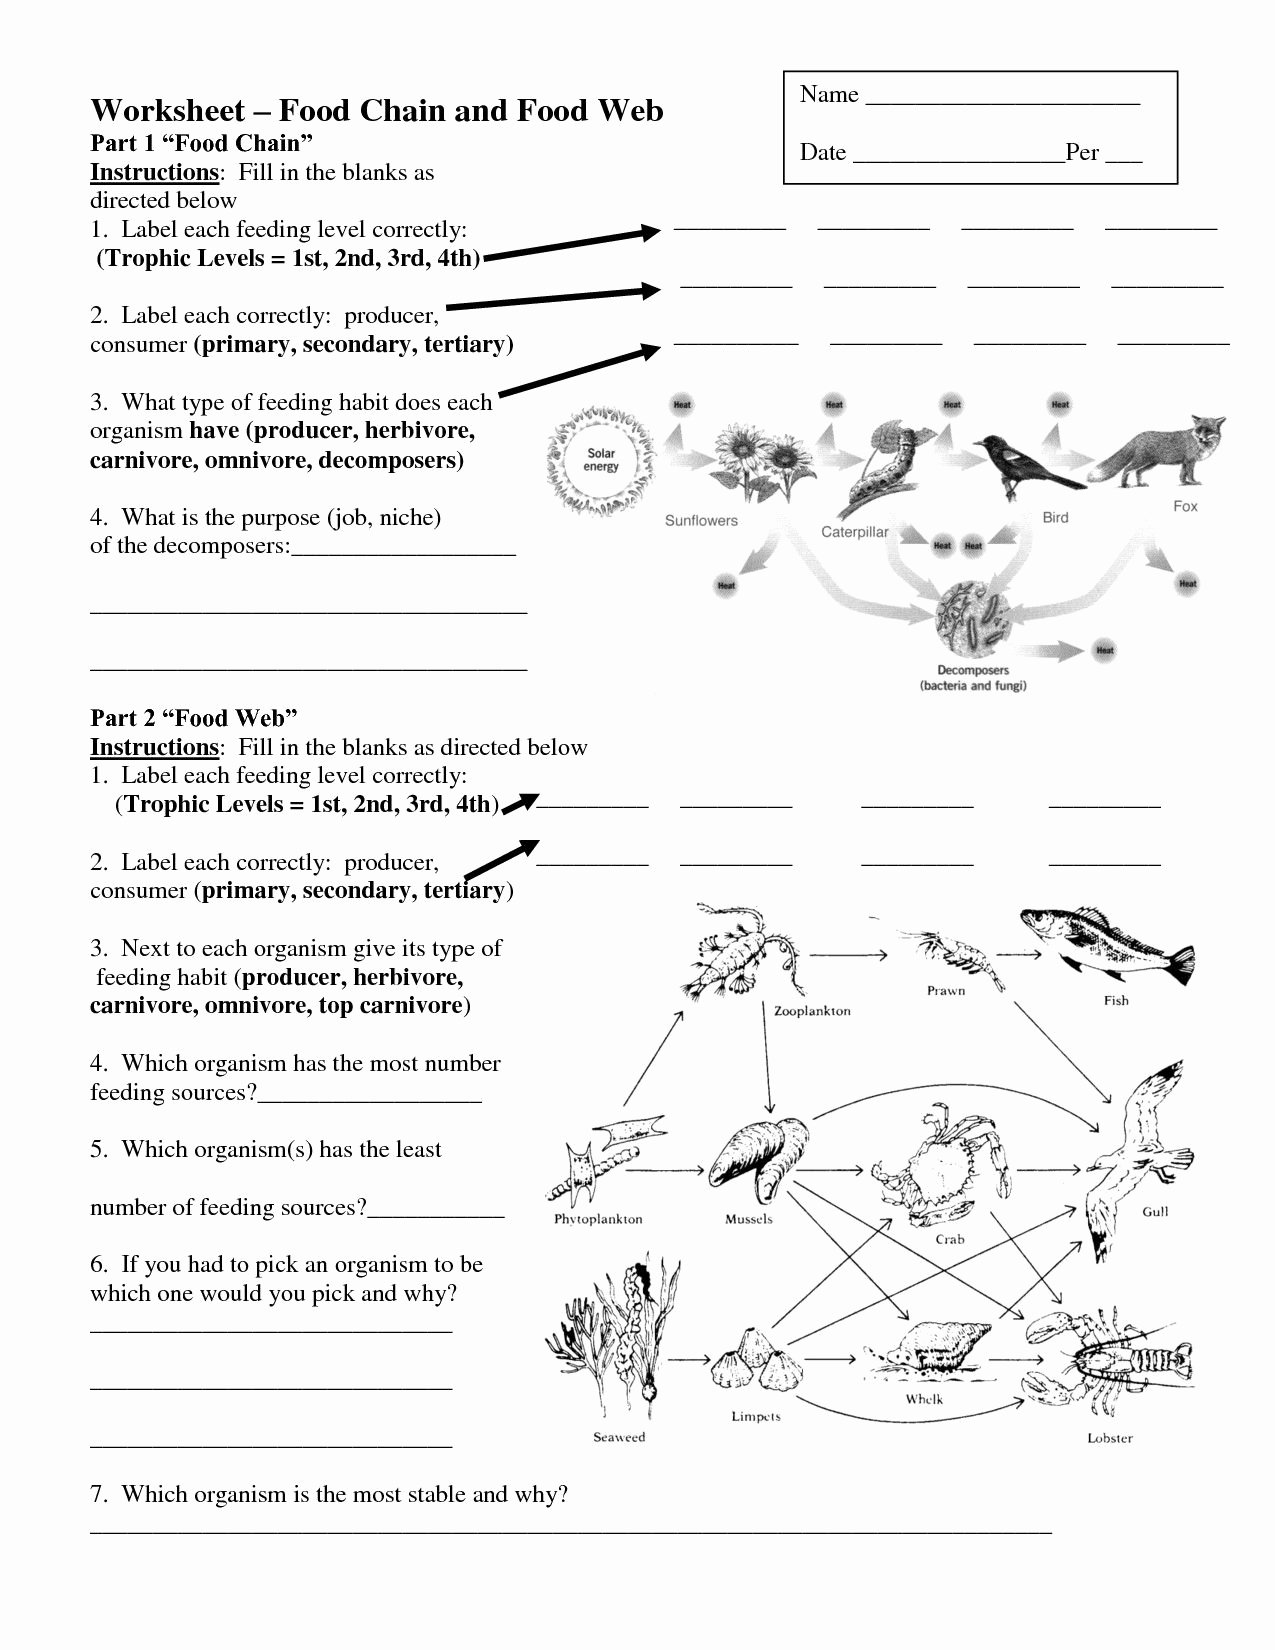 Food Chains and Webs Worksheet Lovely Worksheets Food Chains and Food Webs Science